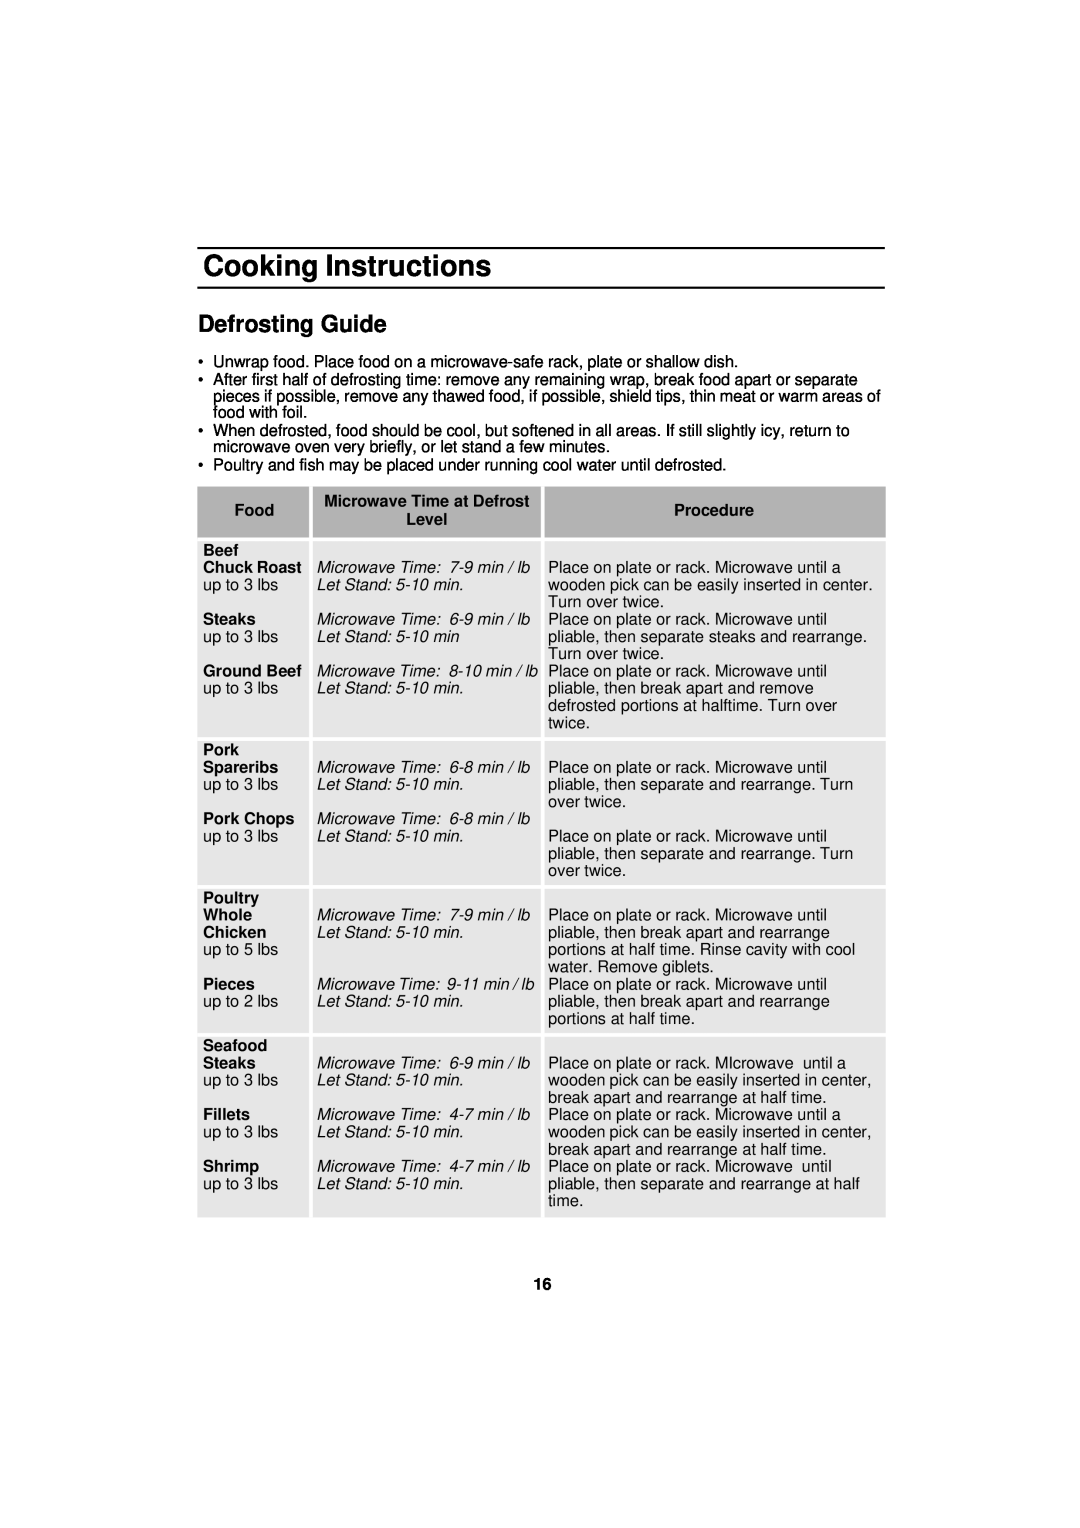 Samsung DE68-01931A-01 Defrosting Guide, Cooking Instructions, Microwave Time 7-9 min / lb, up to 3 lbs, Turn over twice 